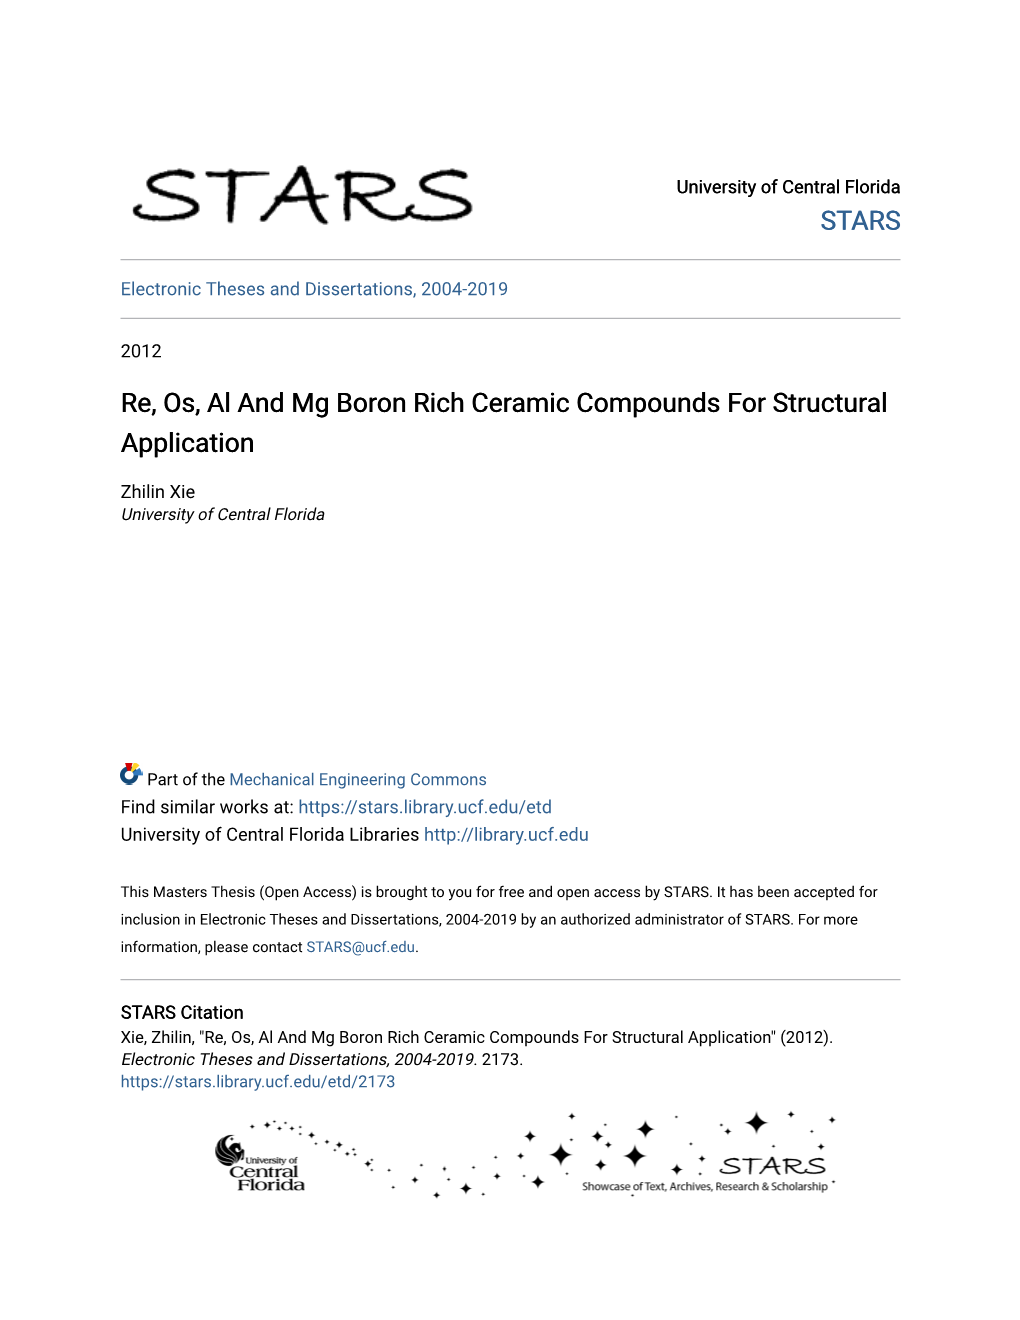 Re, Os, Al and Mg Boron Rich Ceramic Compounds for Structural Application